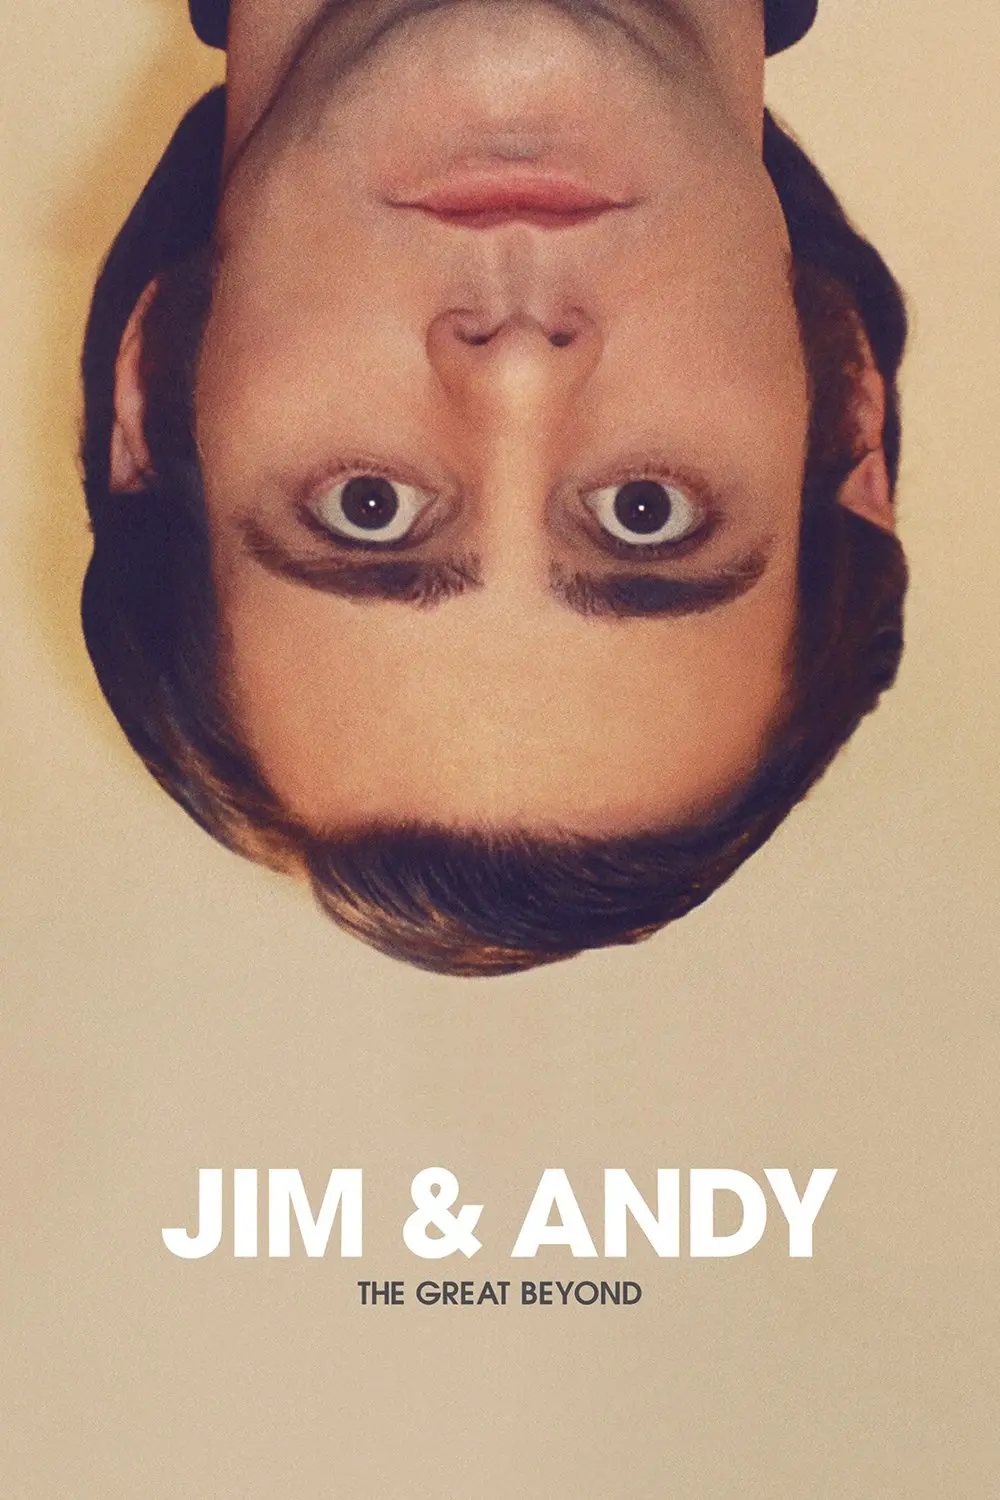 Jim & Andy: The Great Beyond - Featuring a Very Special, Contractually Obligated Mention of Tony Clifton_peliplat